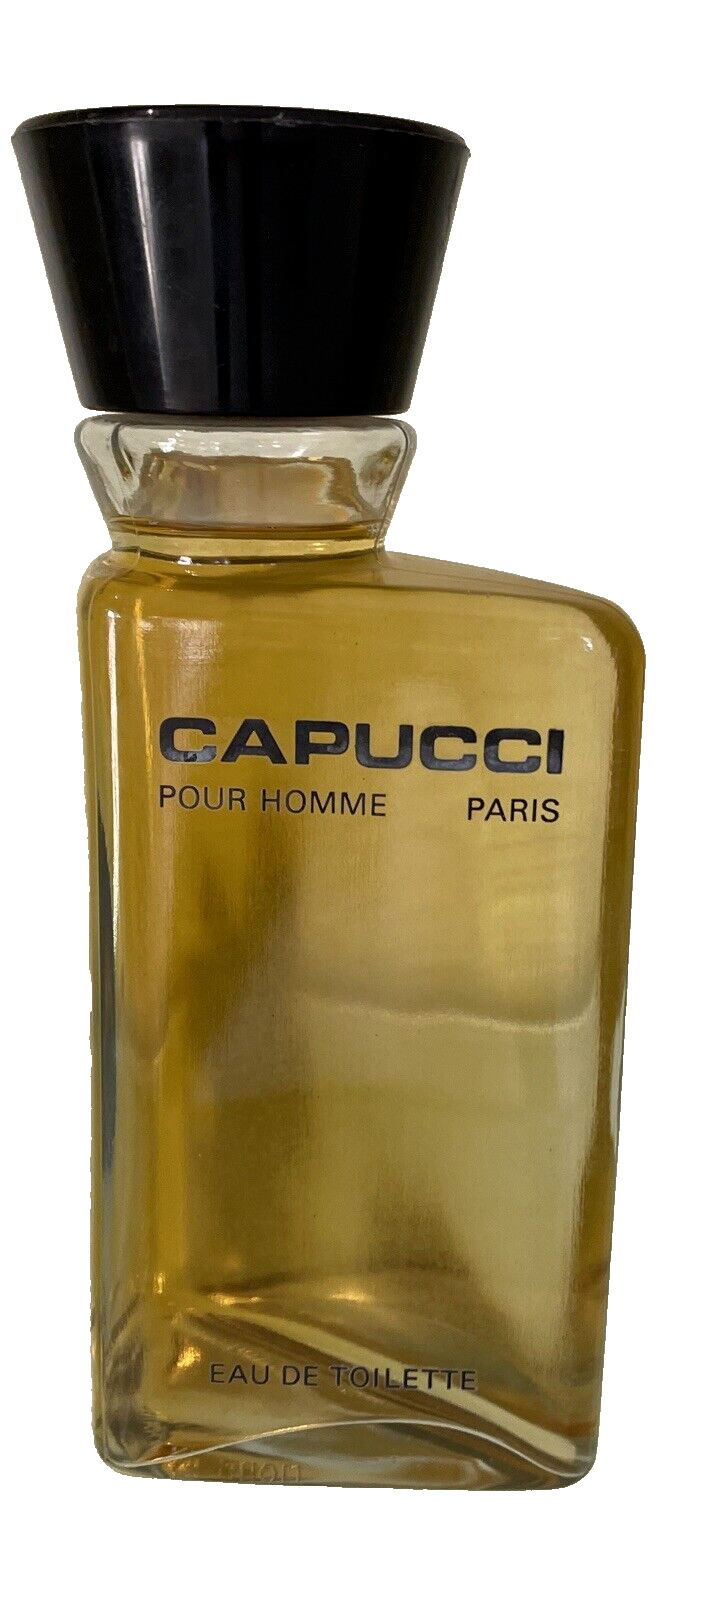 CAPUCCI Pour Homme PERFUME FACTICE Large Store Display Art Glass Bottle EDT